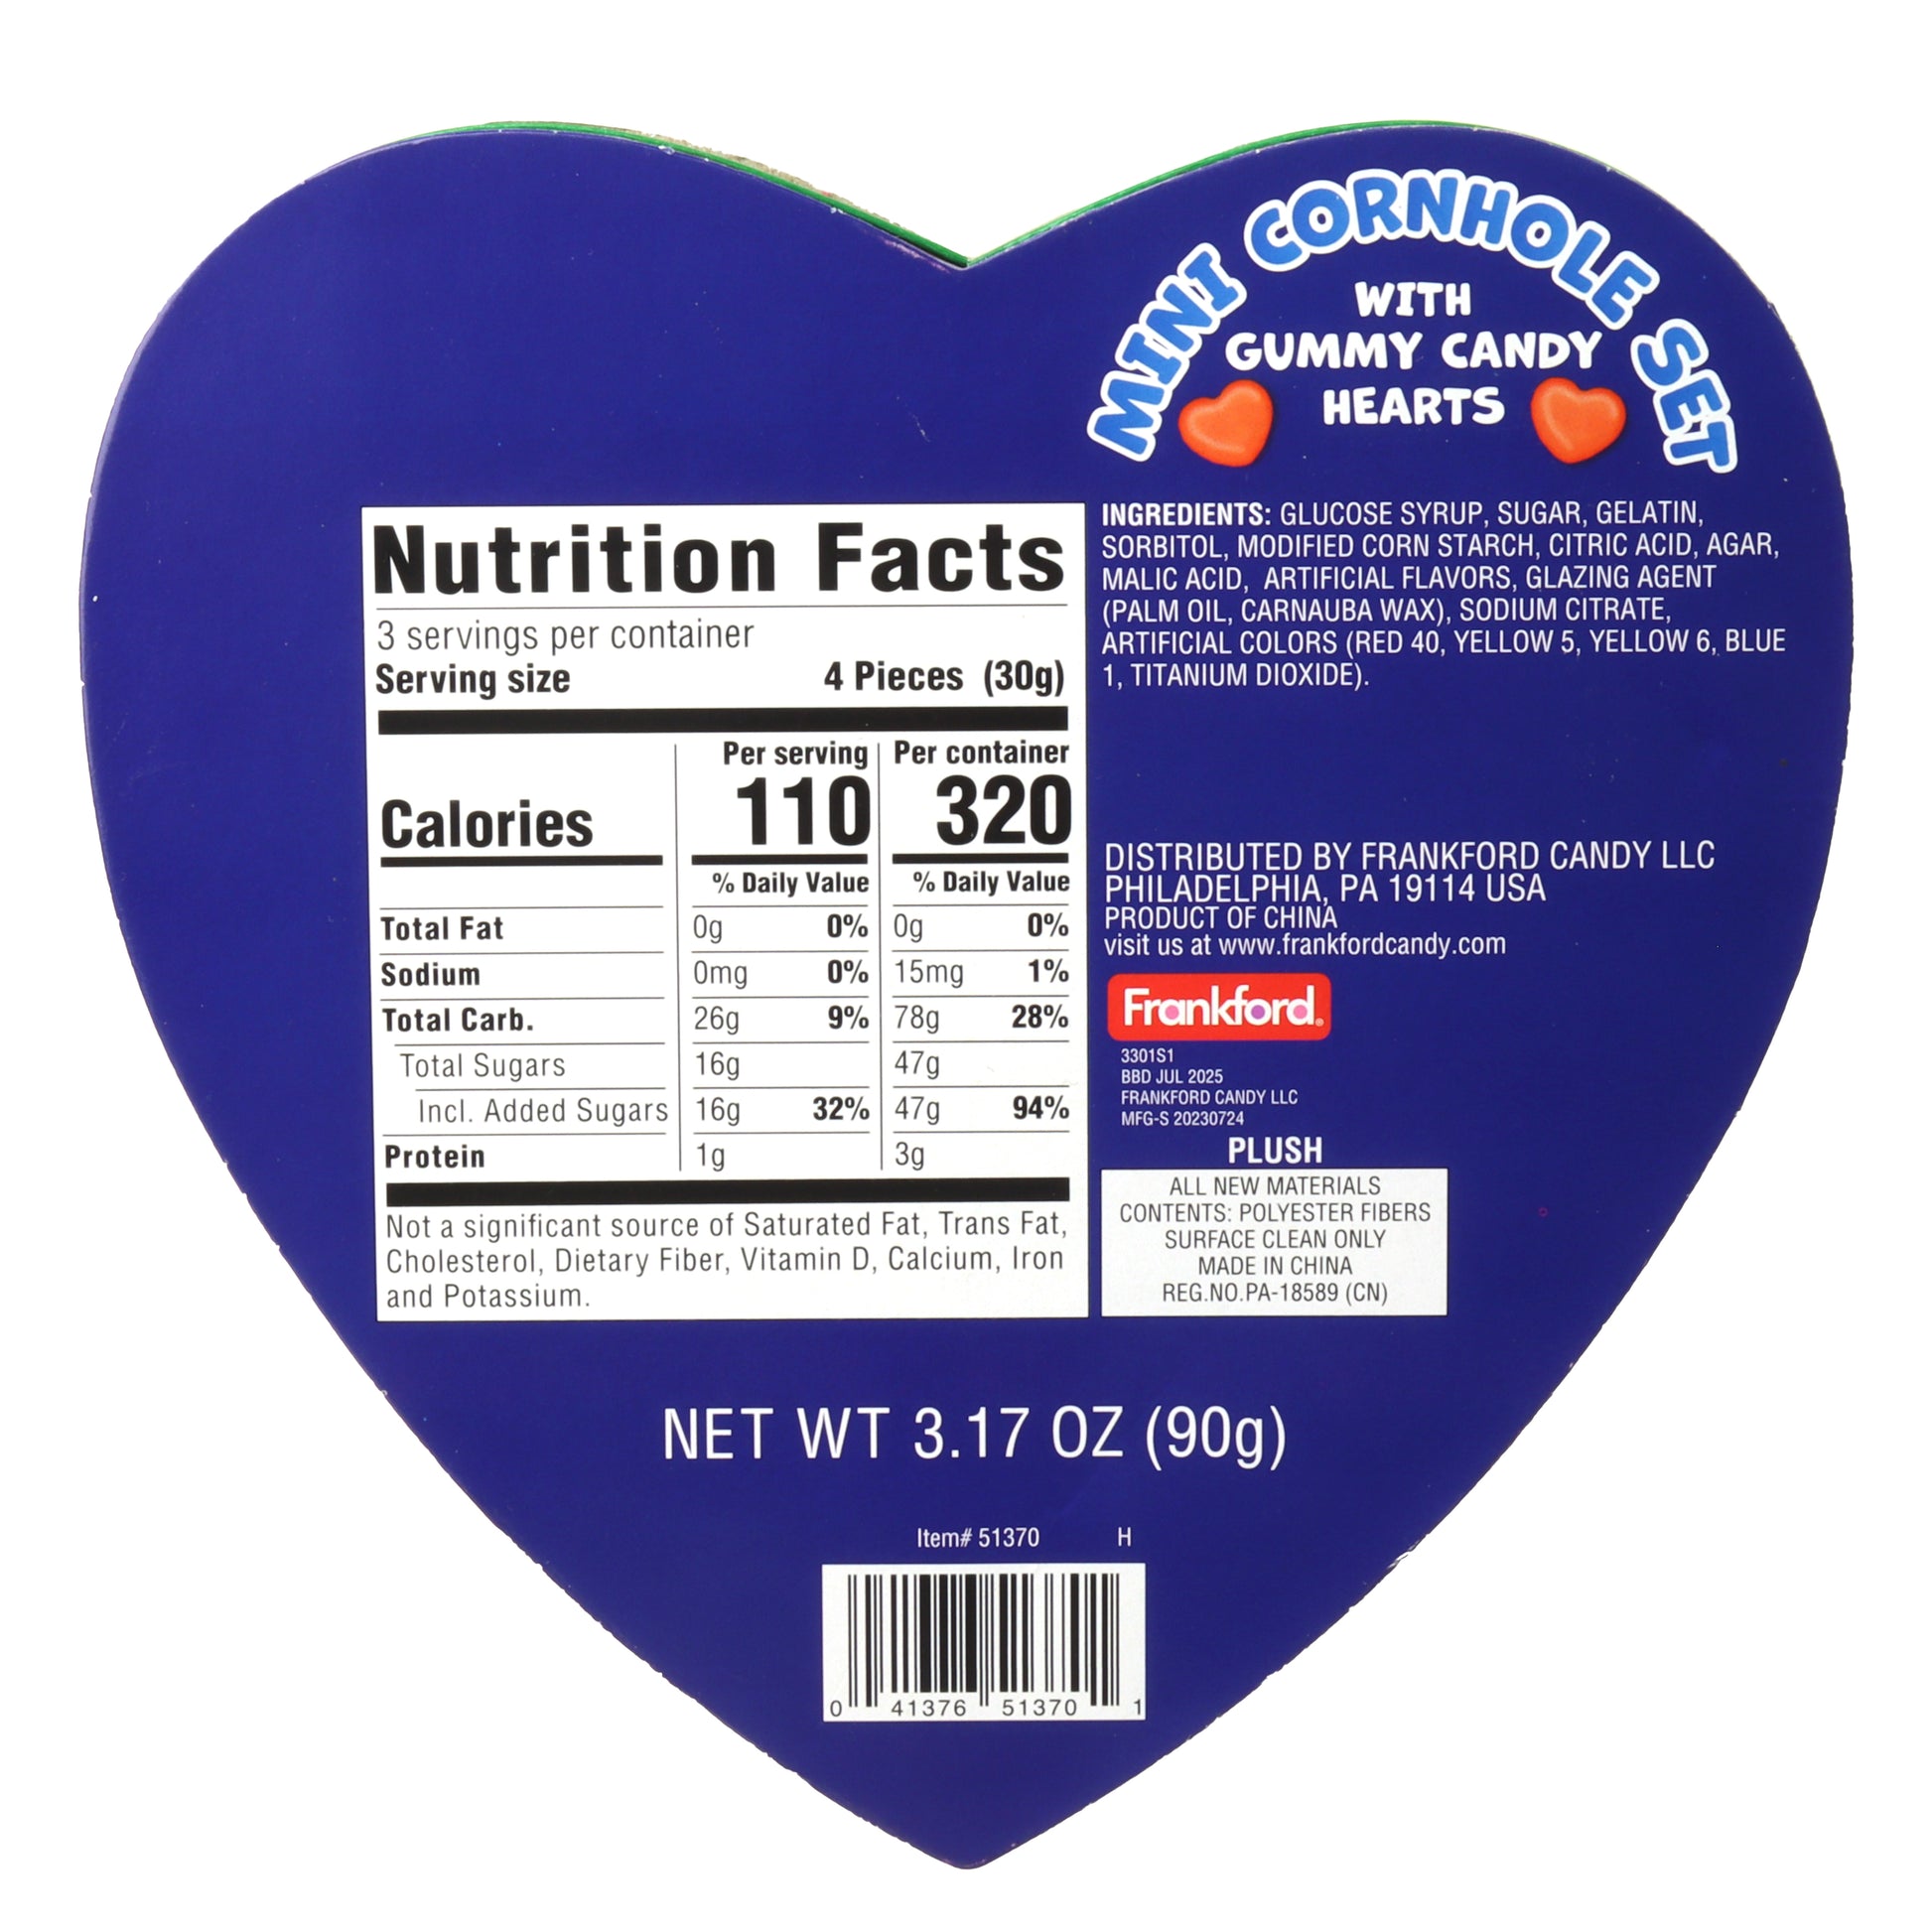 Blue heart shaped box with nutrition information